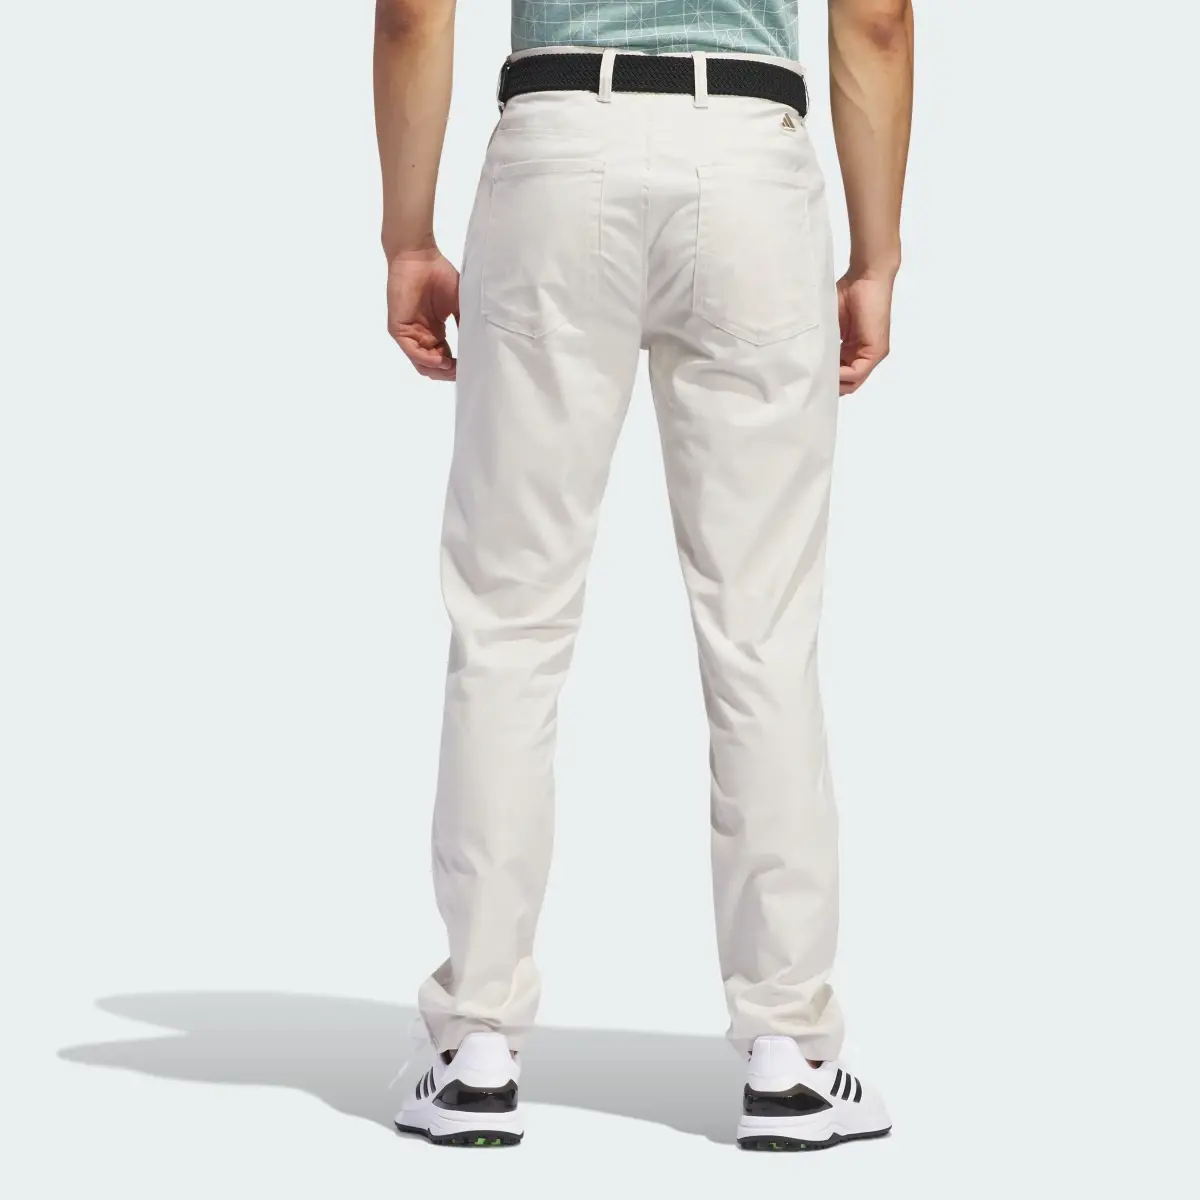 Adidas Go-To 5-Pocket Golf Trousers. 2